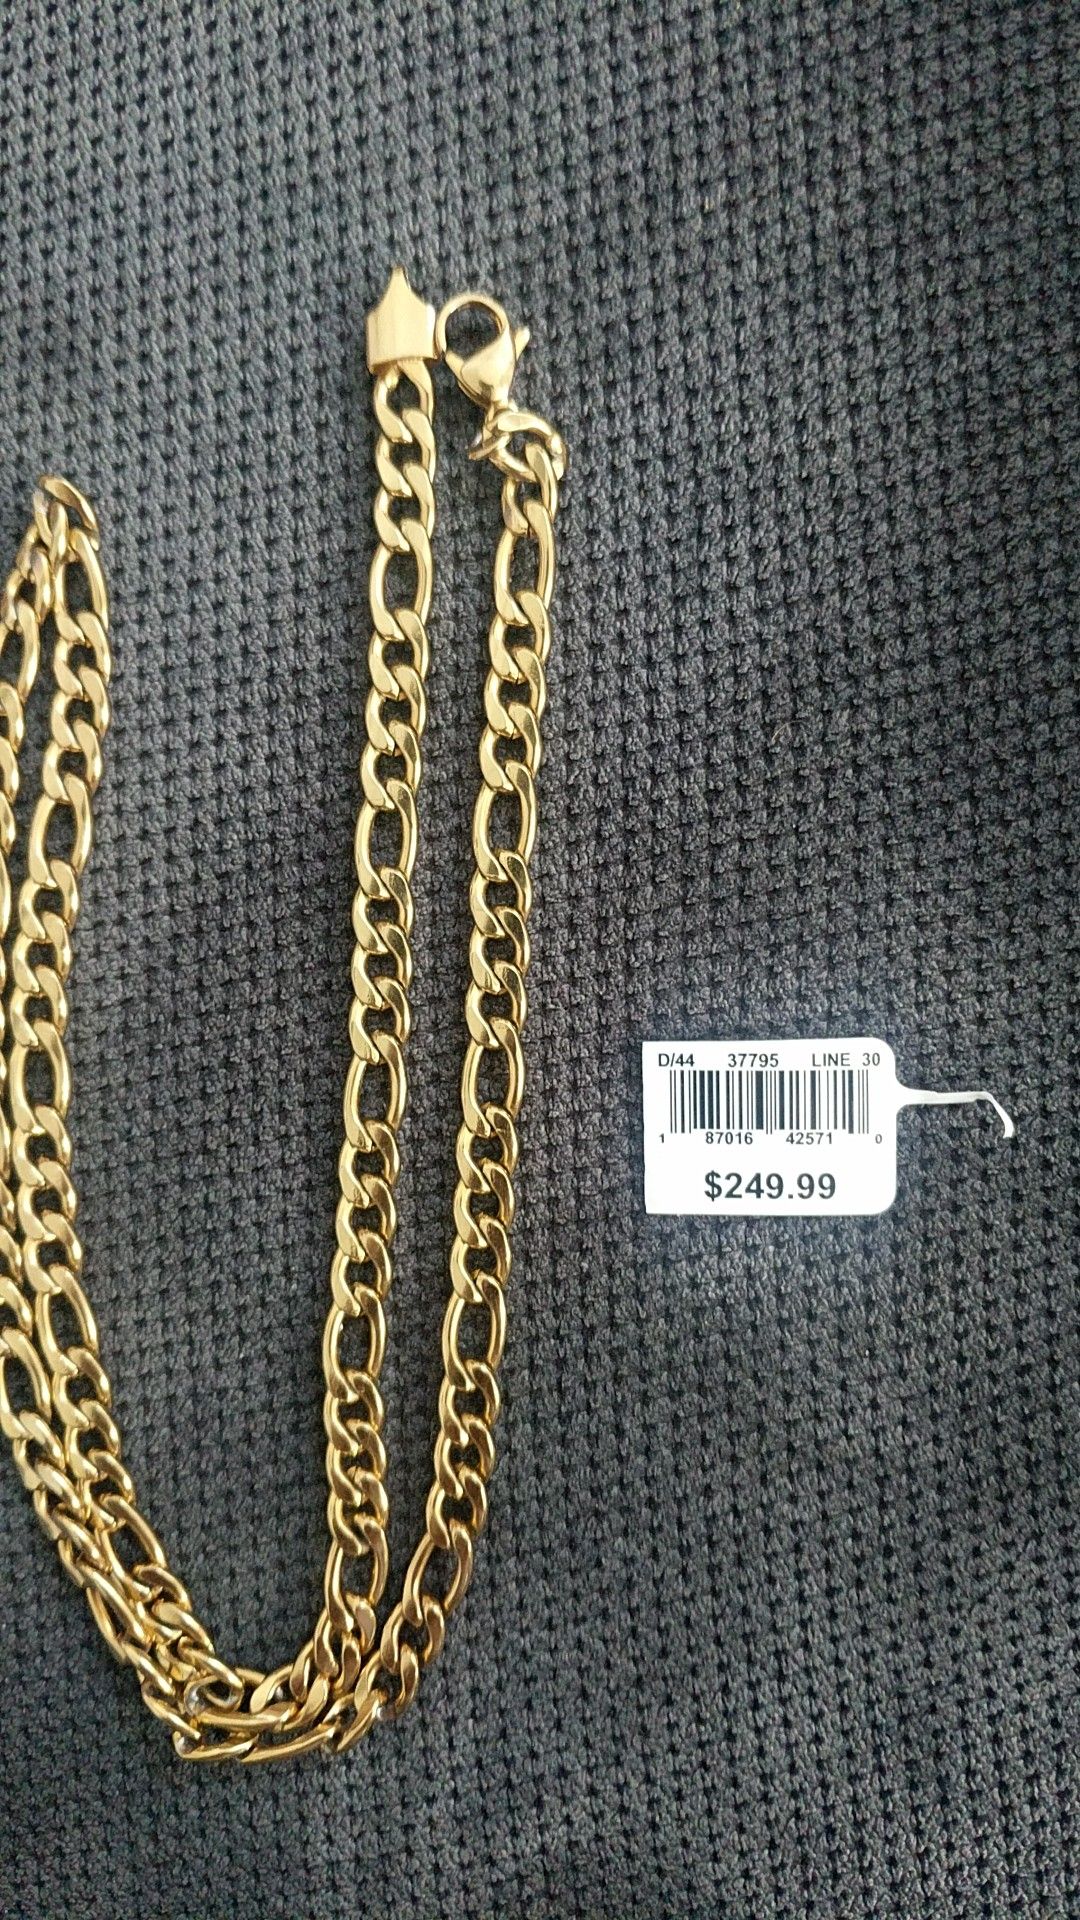 Plated gold chain